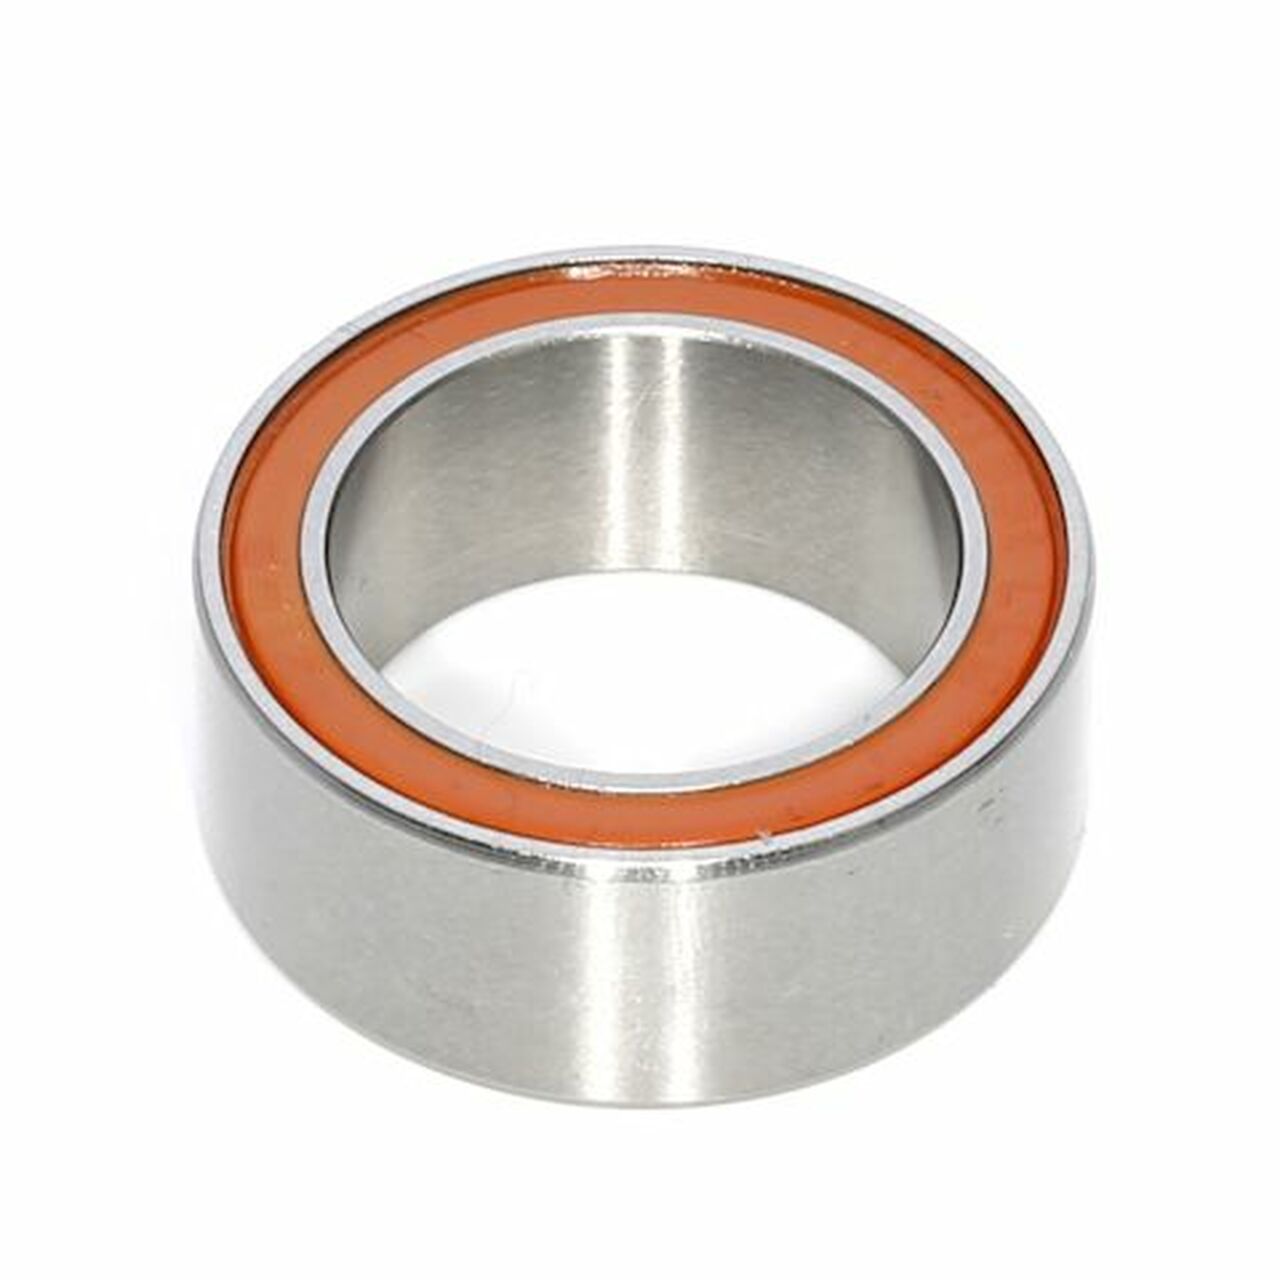 Enduro DR 21531 LLB - ABEC-3, Double-Row, Radial Bearing (C3 Clearance) - 21.5mm x 31mm x 12mm